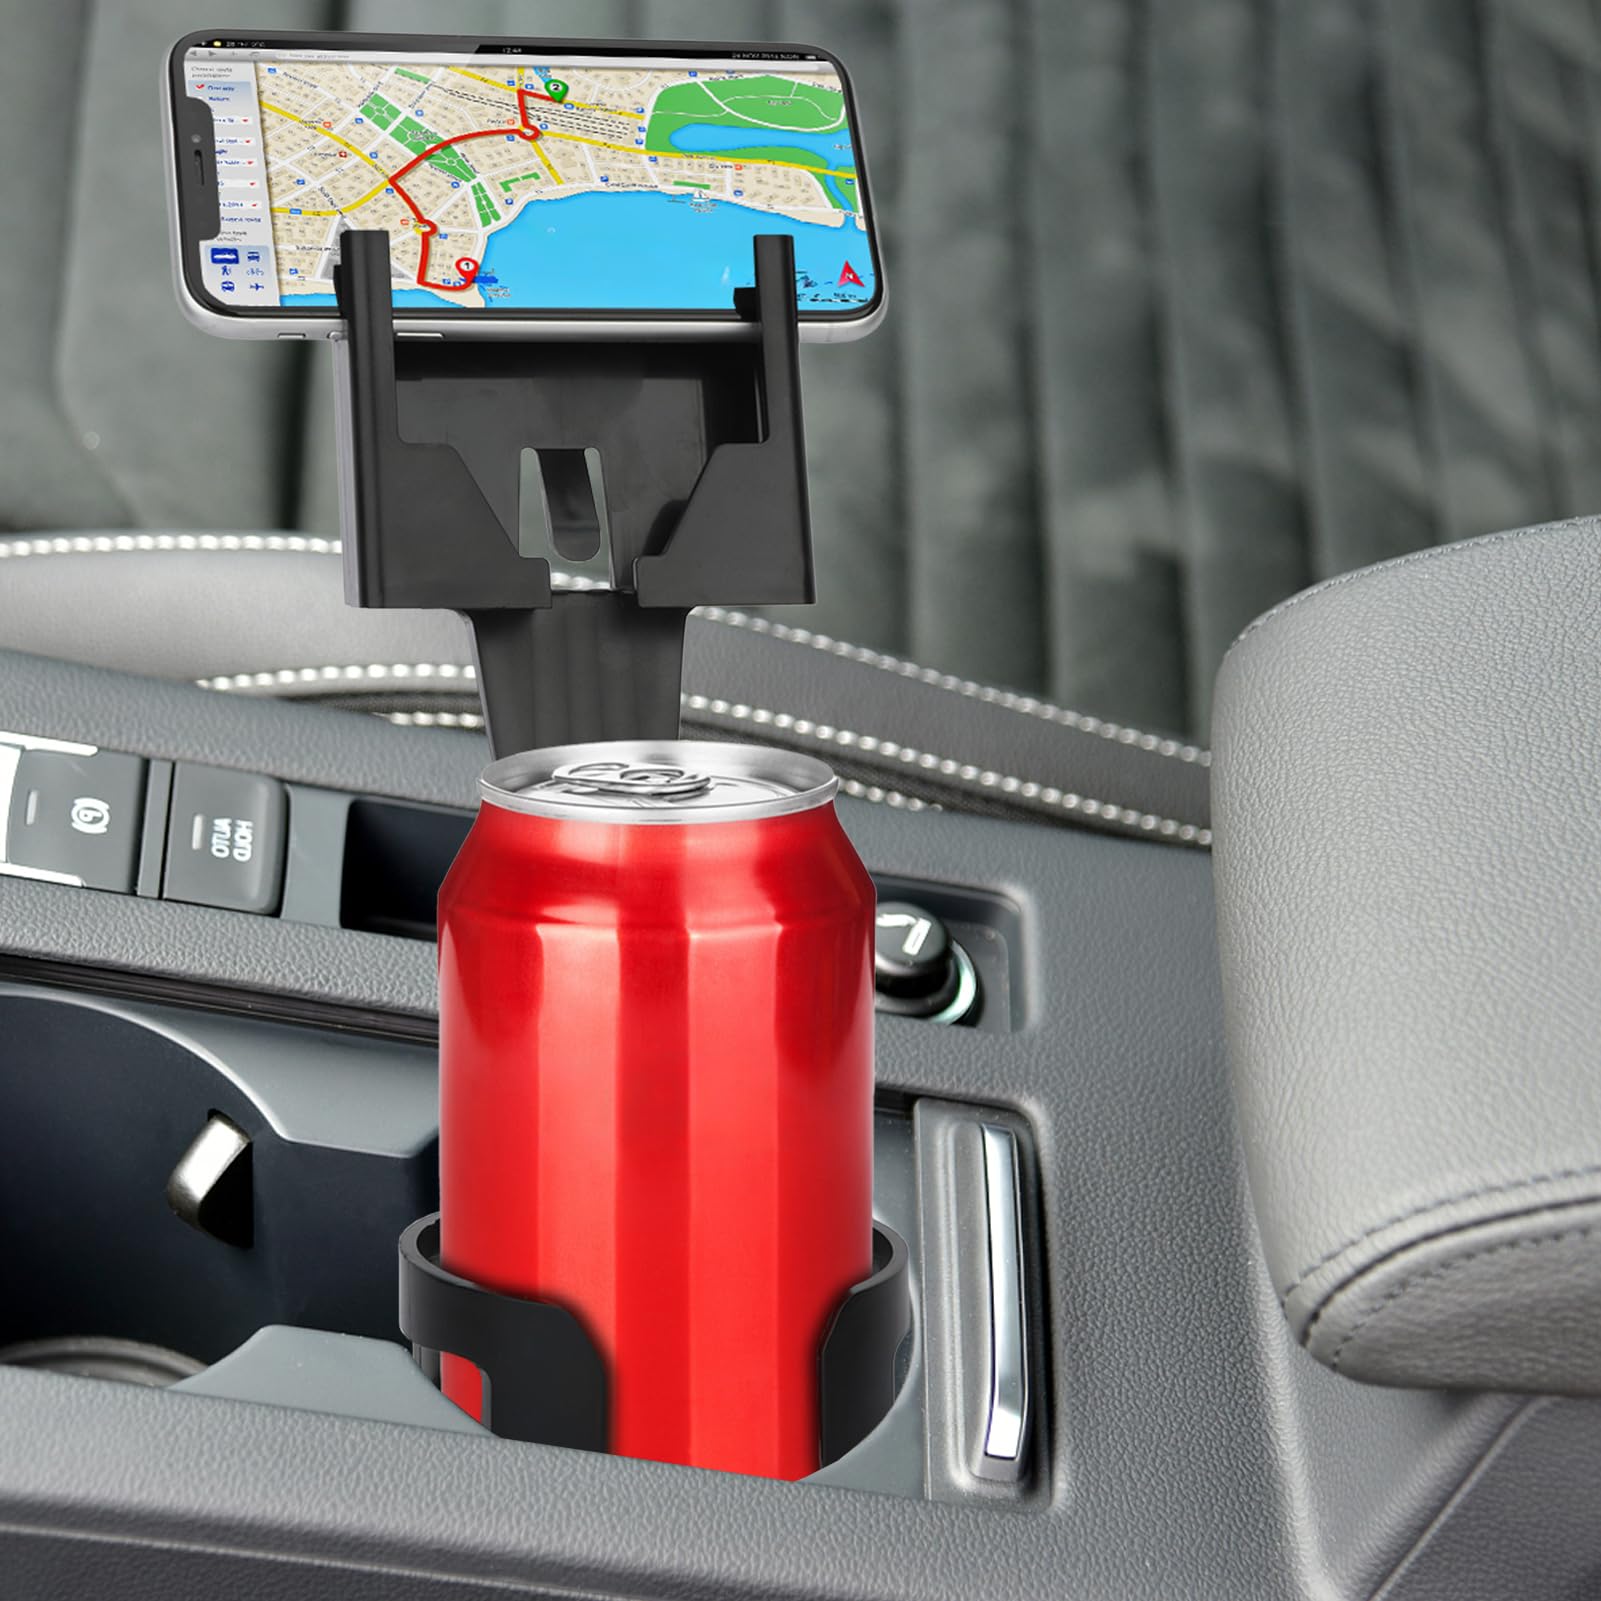 VEAREAR Phone Mount for Car, 2-in-1 Adjustable Car Phone Holder Cup Holder in Vehicle, Stable Cell Phone Stand, Fit for Different Size Cellphone and Cup